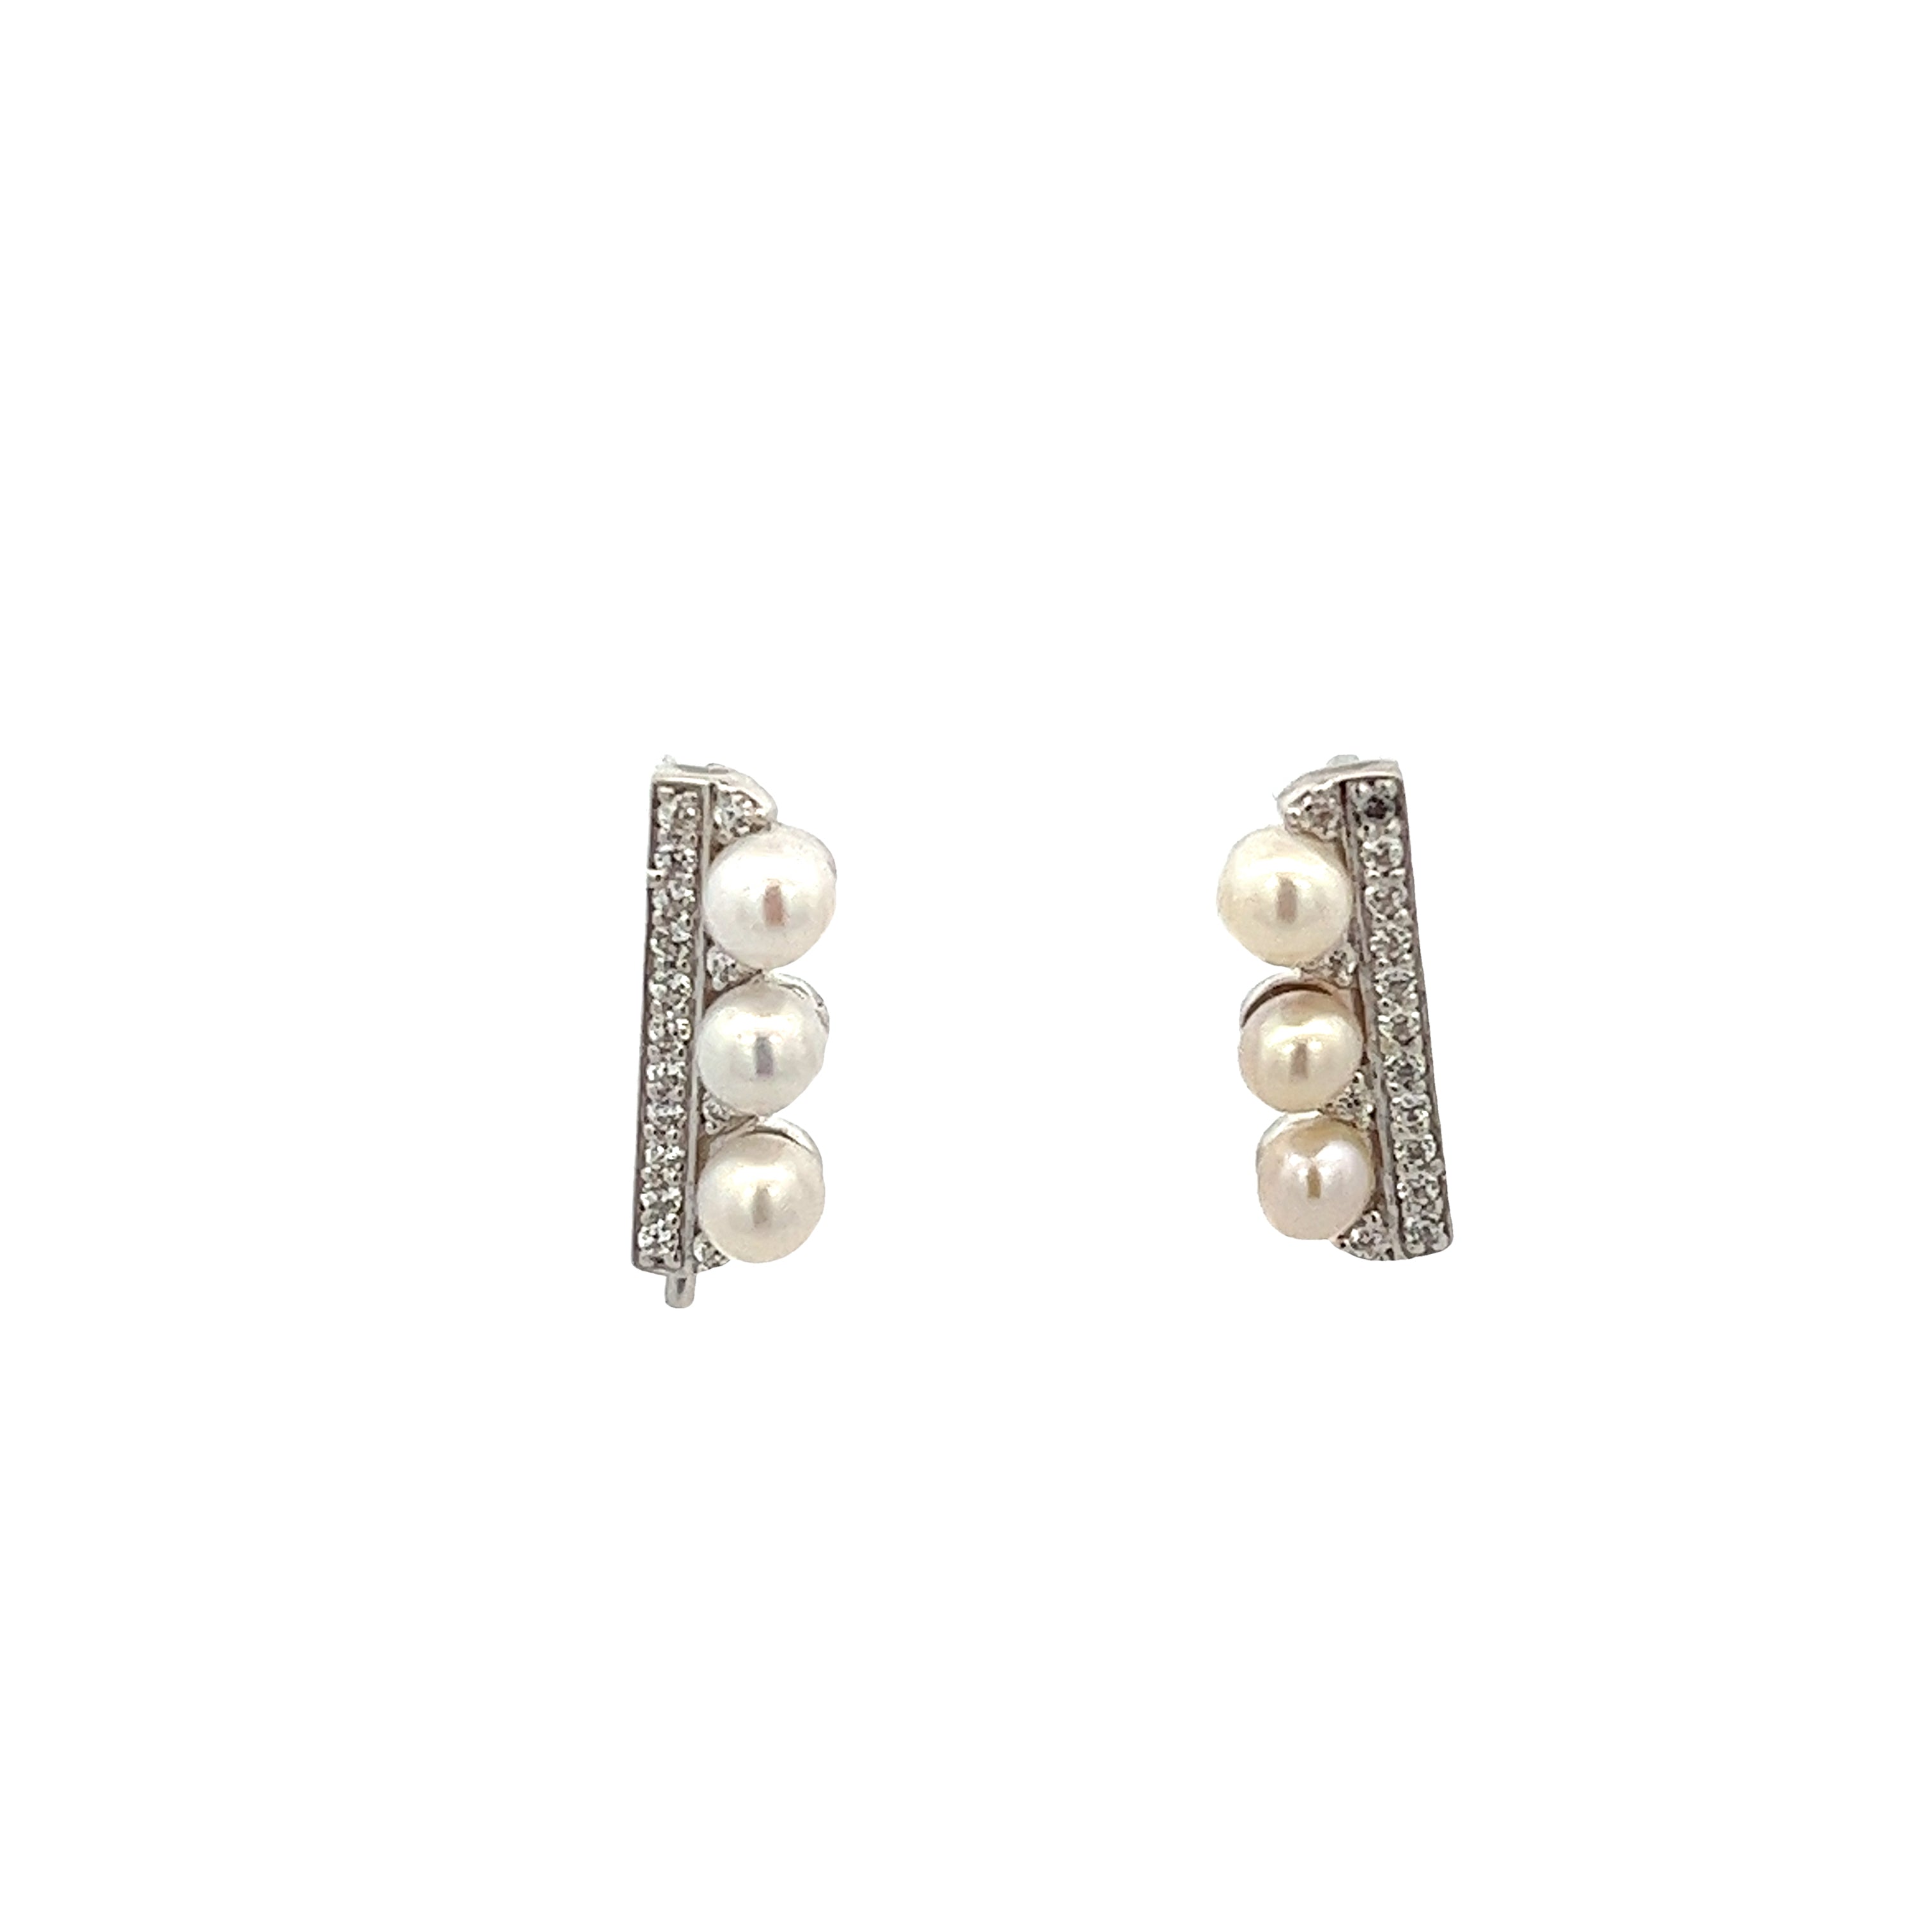 925 SILVER PLATED EARRINGS WITH PEARLS AND CRYSTALS